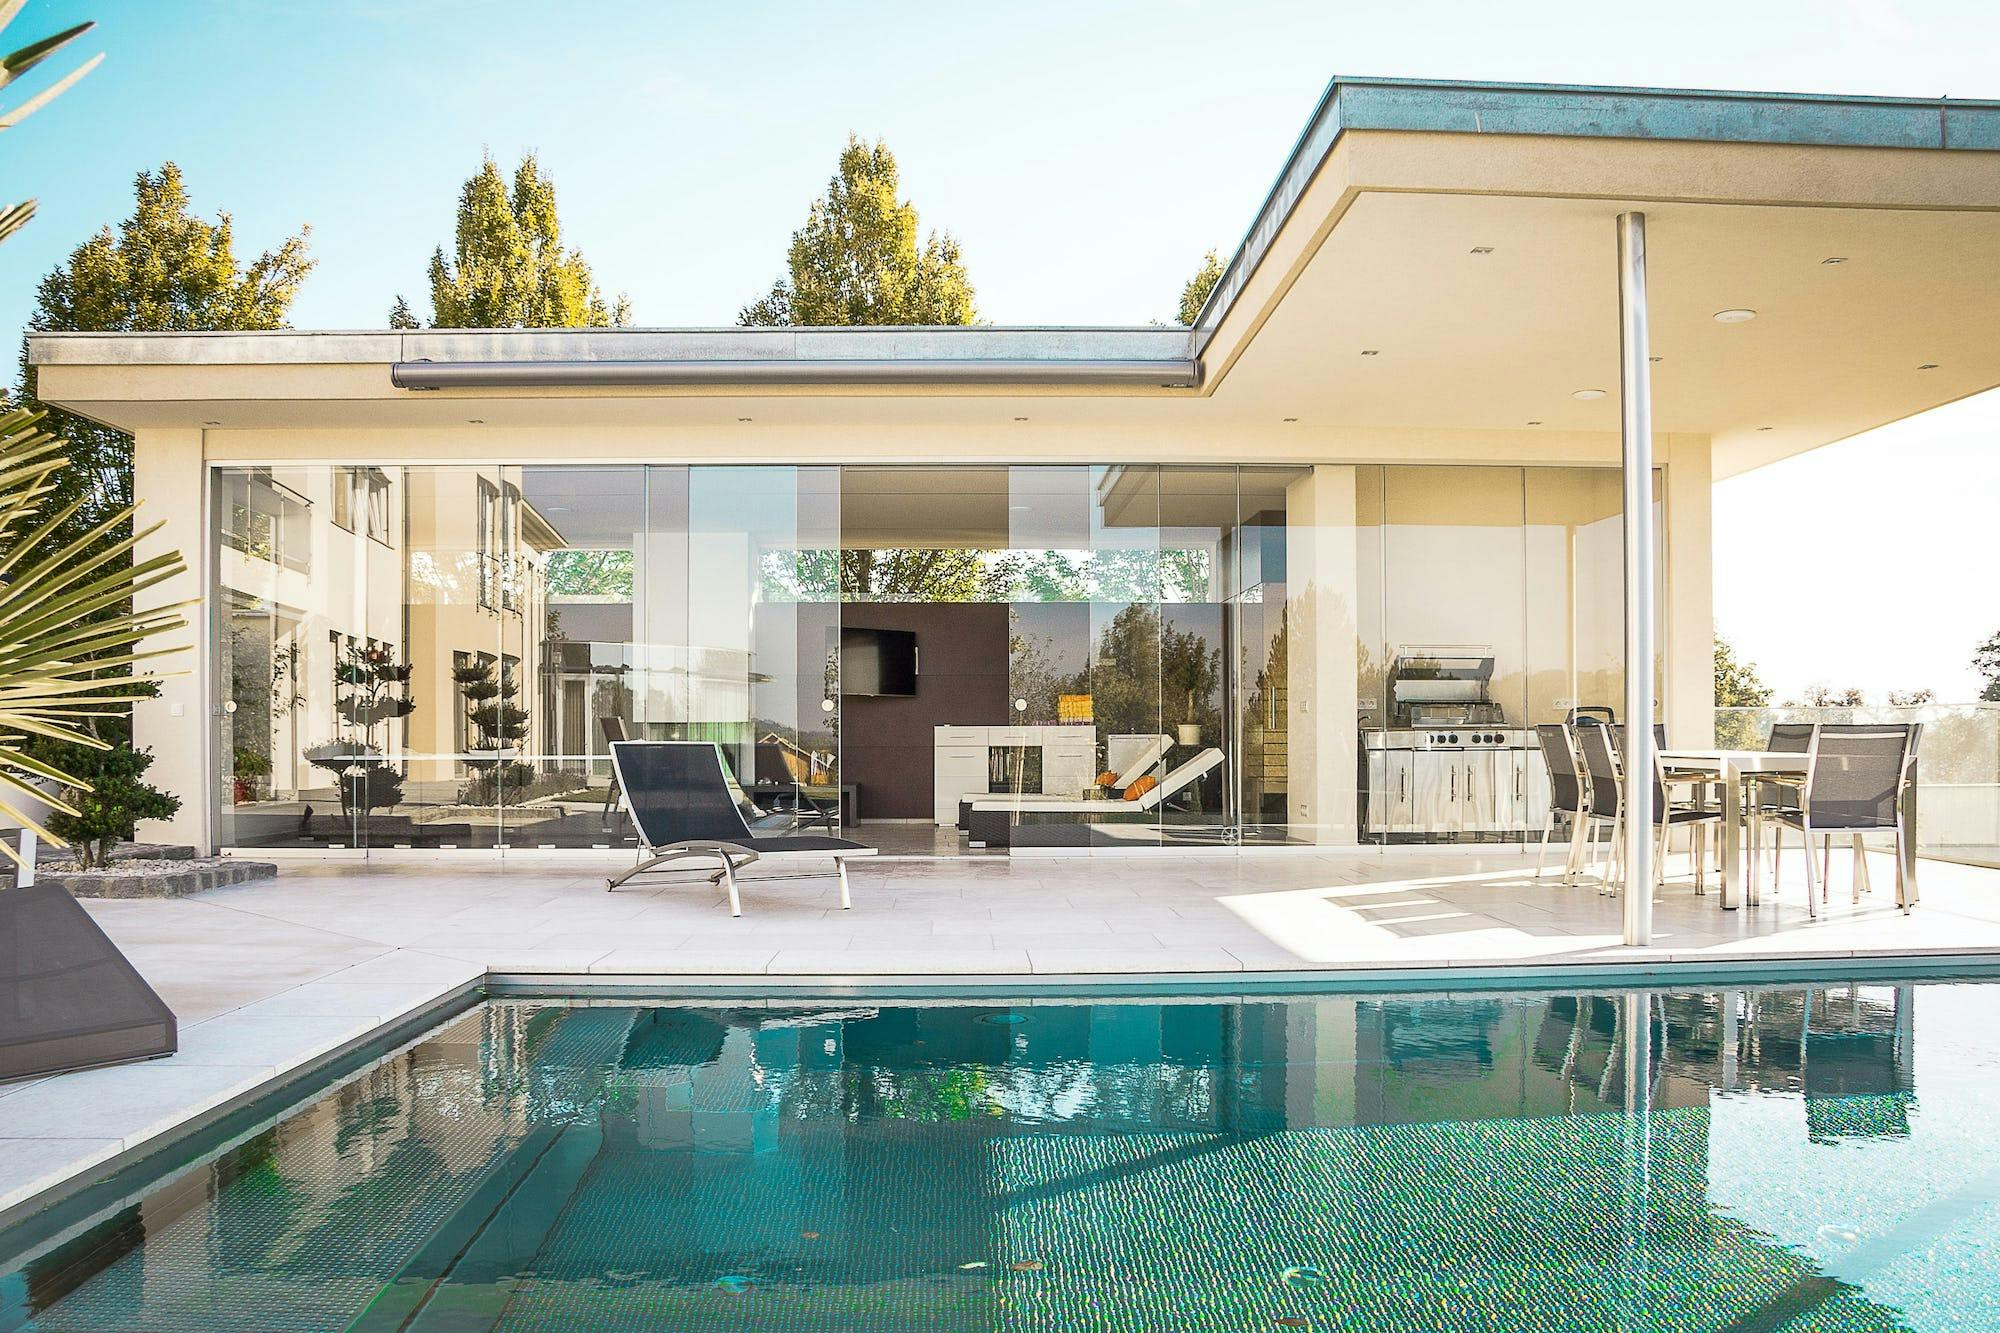 The backyard and side-view of a modern home with a swimming pool, pictured on a sunny day 